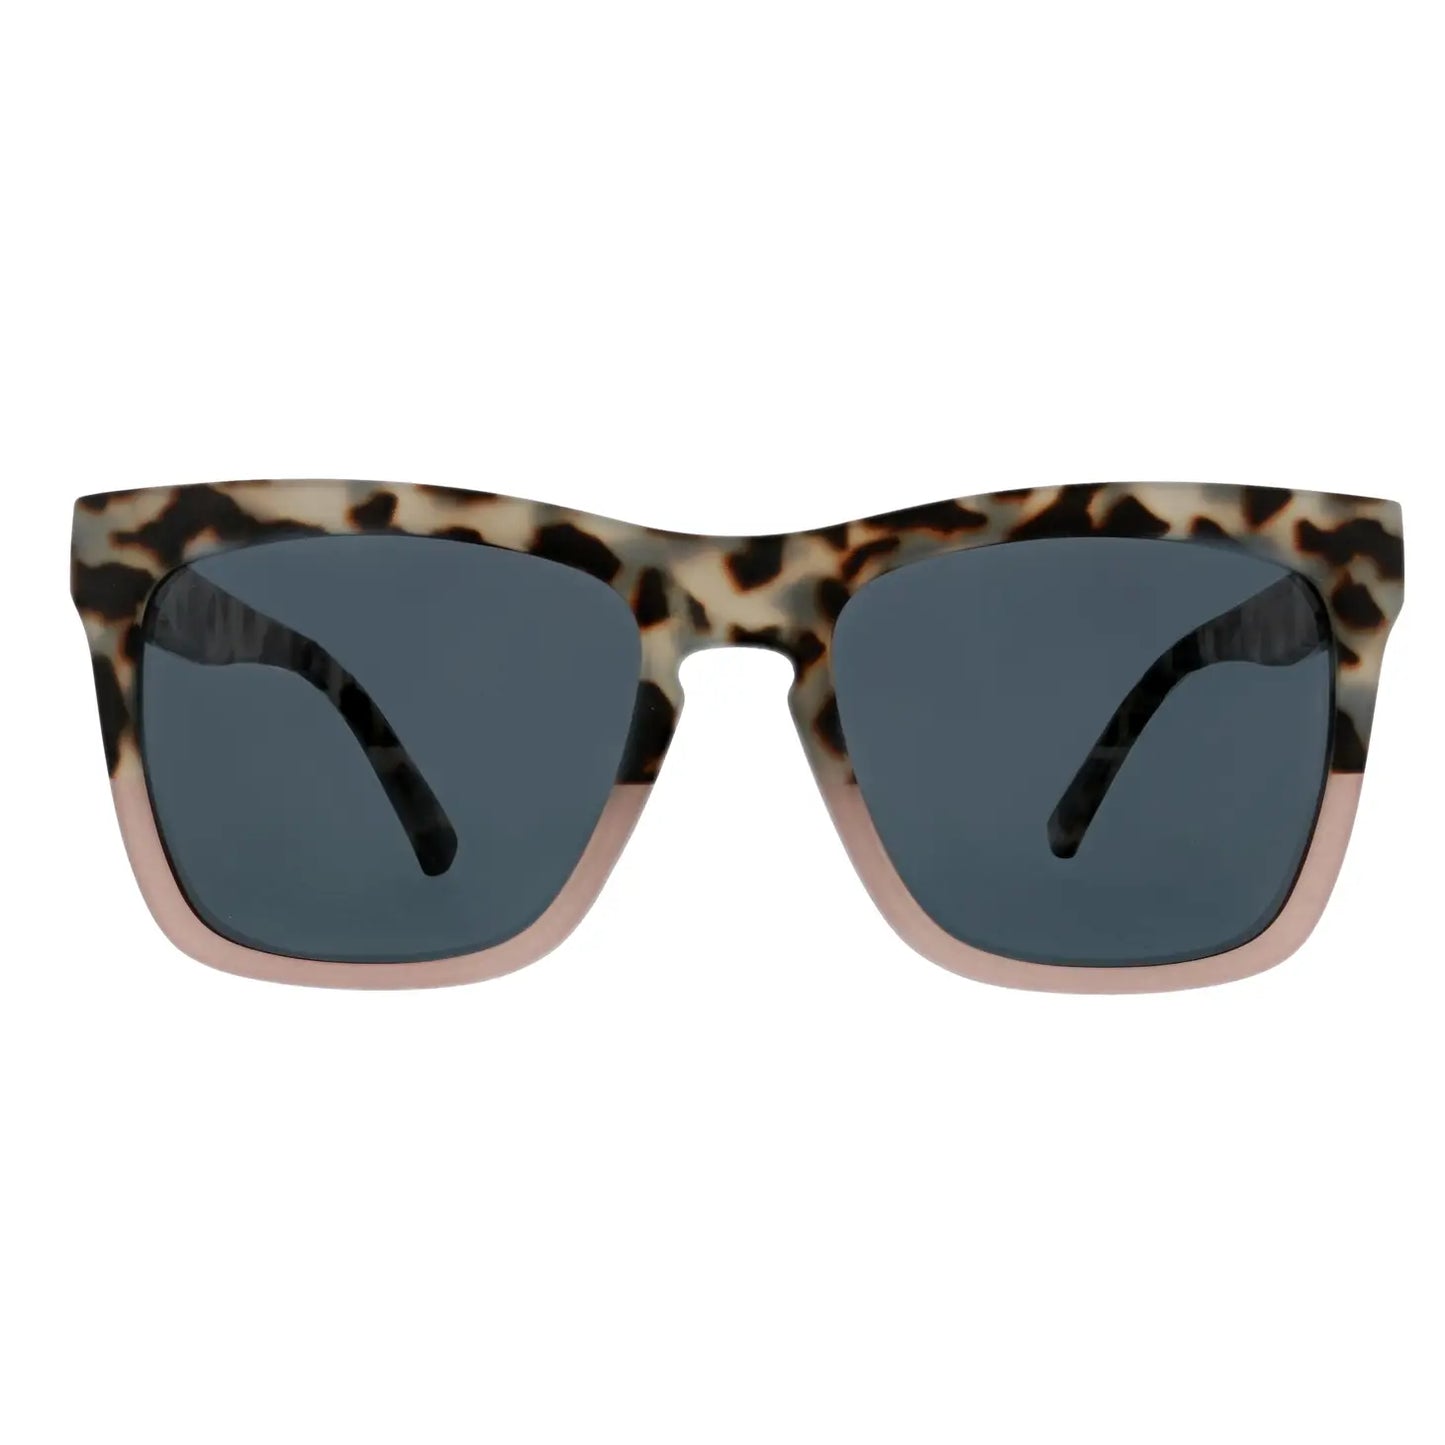 Peepers Cape May Reading Sunglasses - Grey Tortoise/Pink